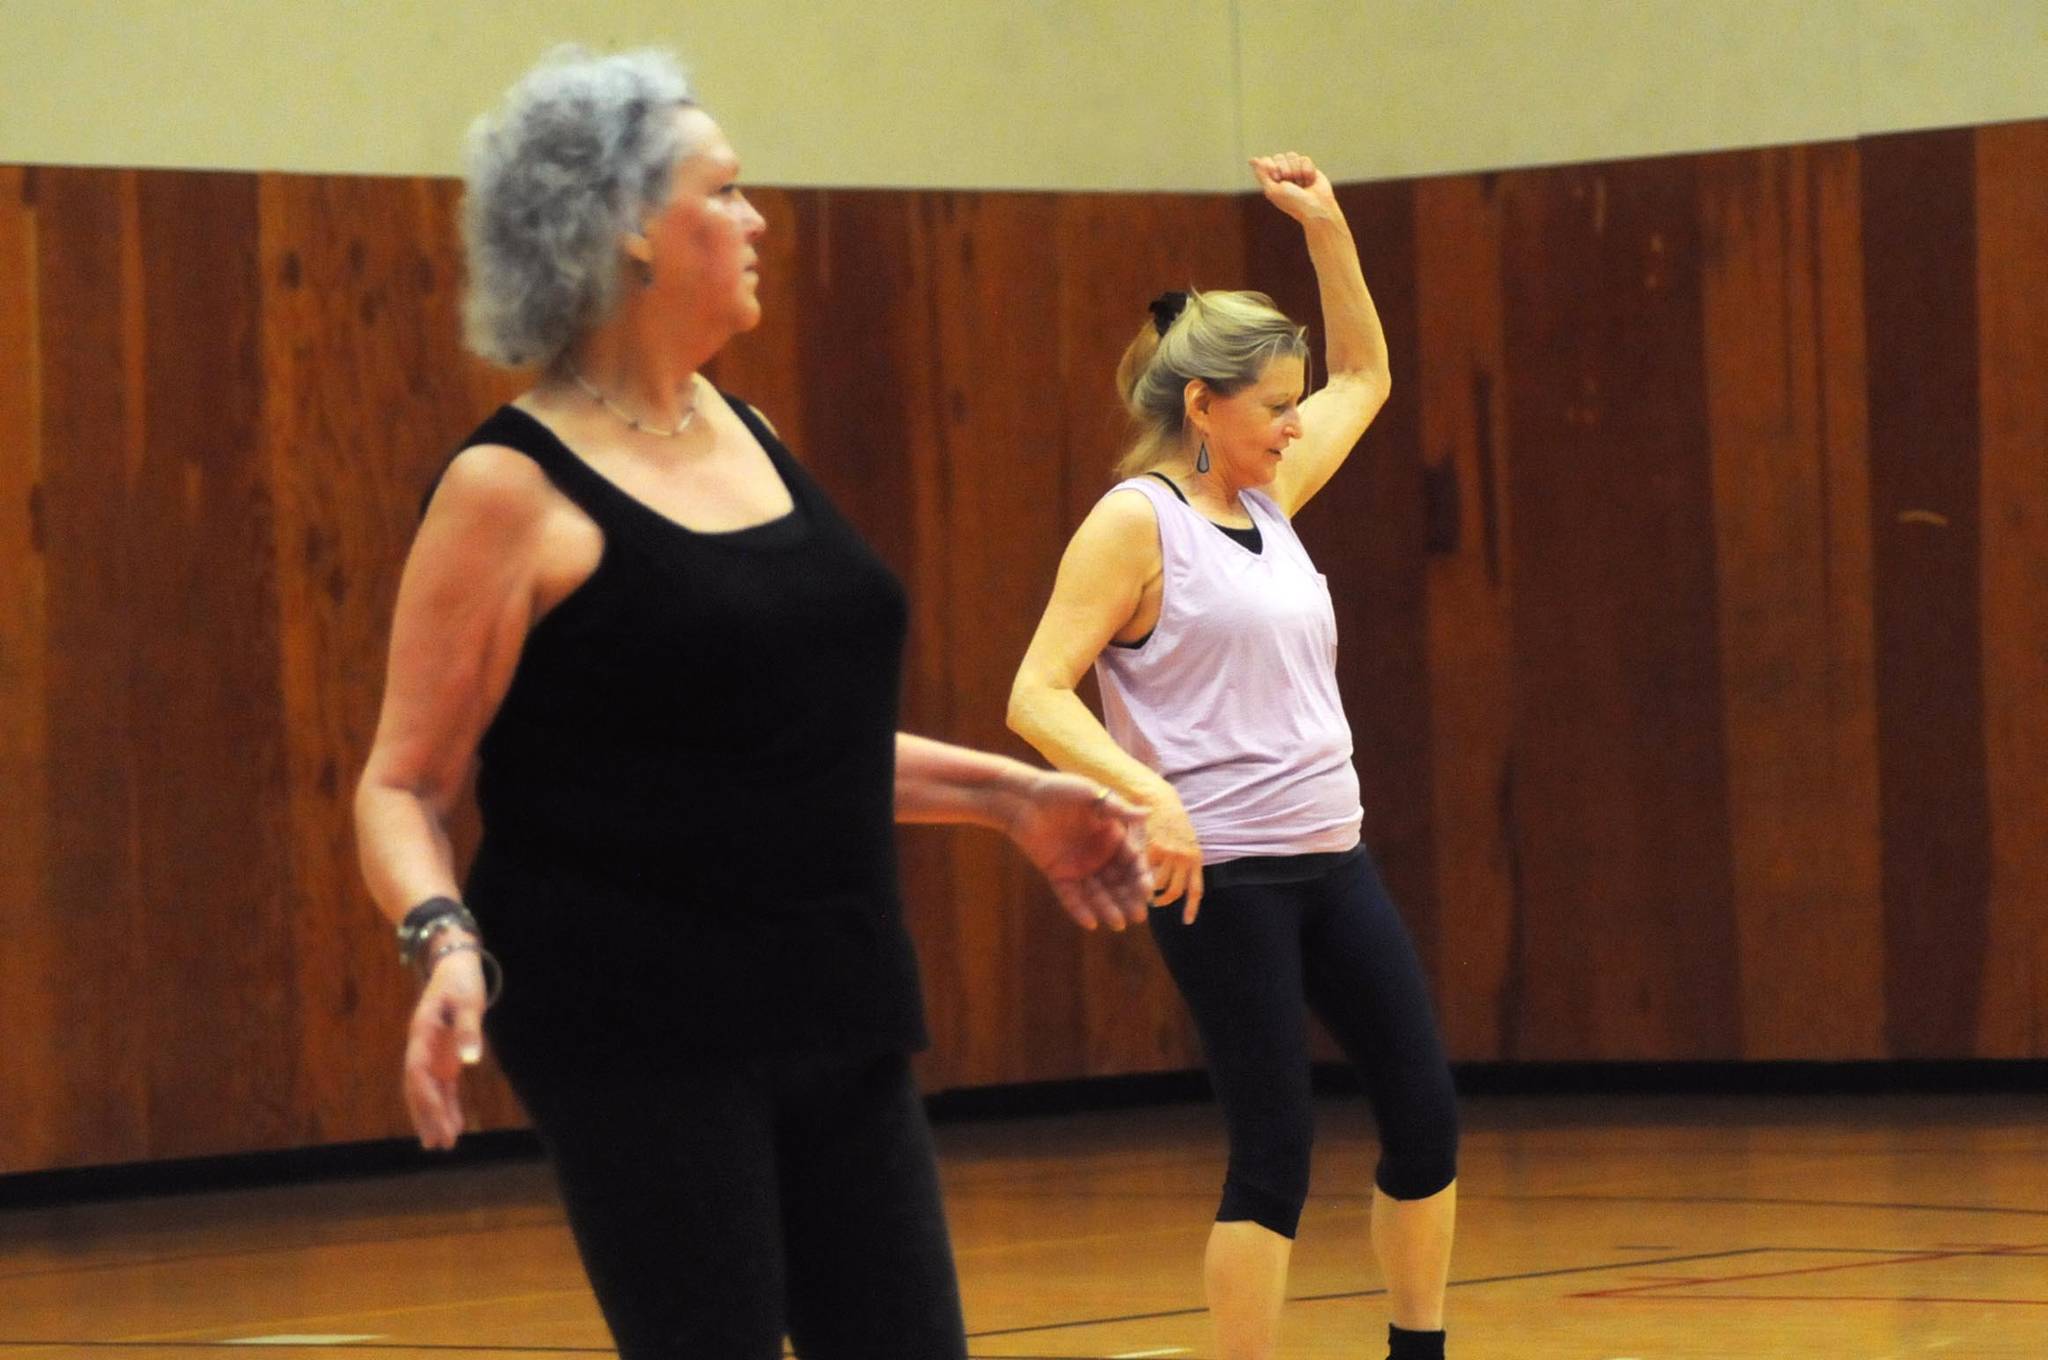 Sallie Macy (right) and Glenna Hudson (left), students in Truman Krogel’s Zumba Gold class, follow the steps to a song during a class at the Kenai Recreation Center on Thursday, March 15, 2018 in Kenai, Alaska. Krogel, 74, said he first tried Zumba himself four years ago, loved it and began teaching classes of his own in January 2017. (Photo by Elizabeth Earl/Peninsula Clarion)